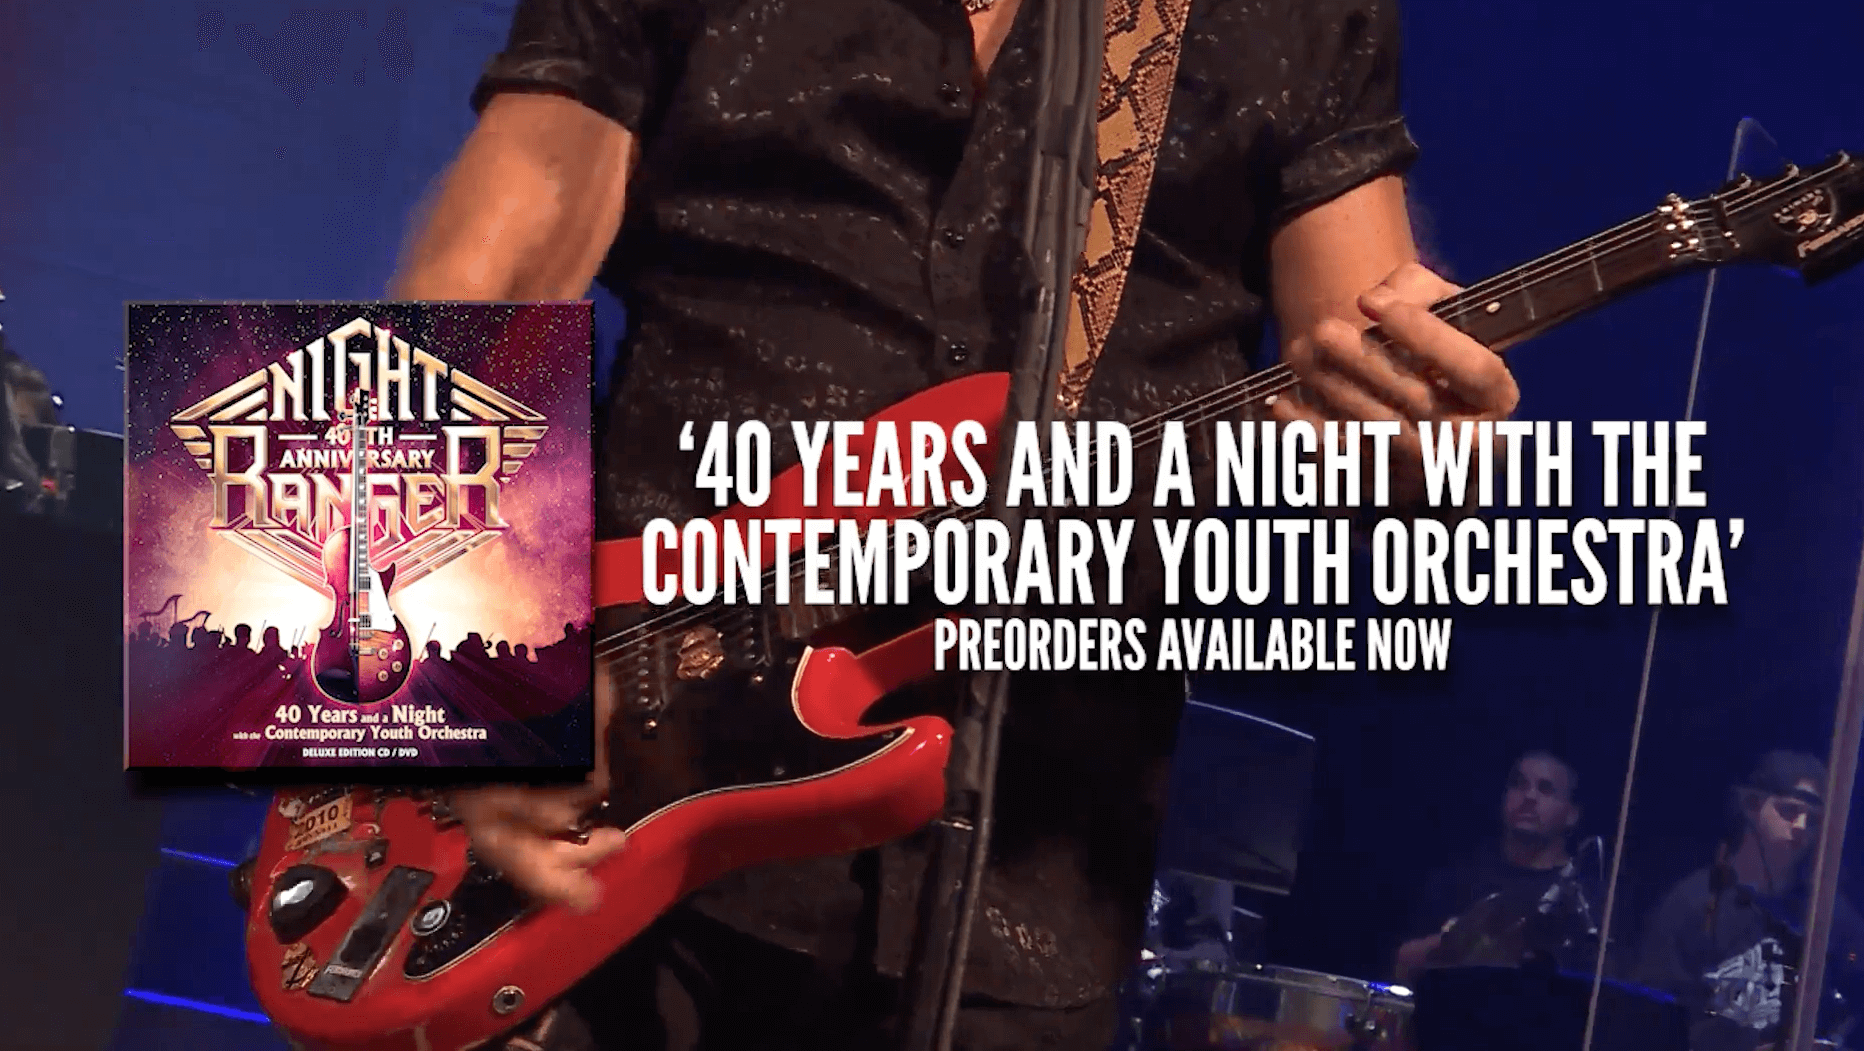 Brand-new live album '40 Years and a Night with Contemporary Youth